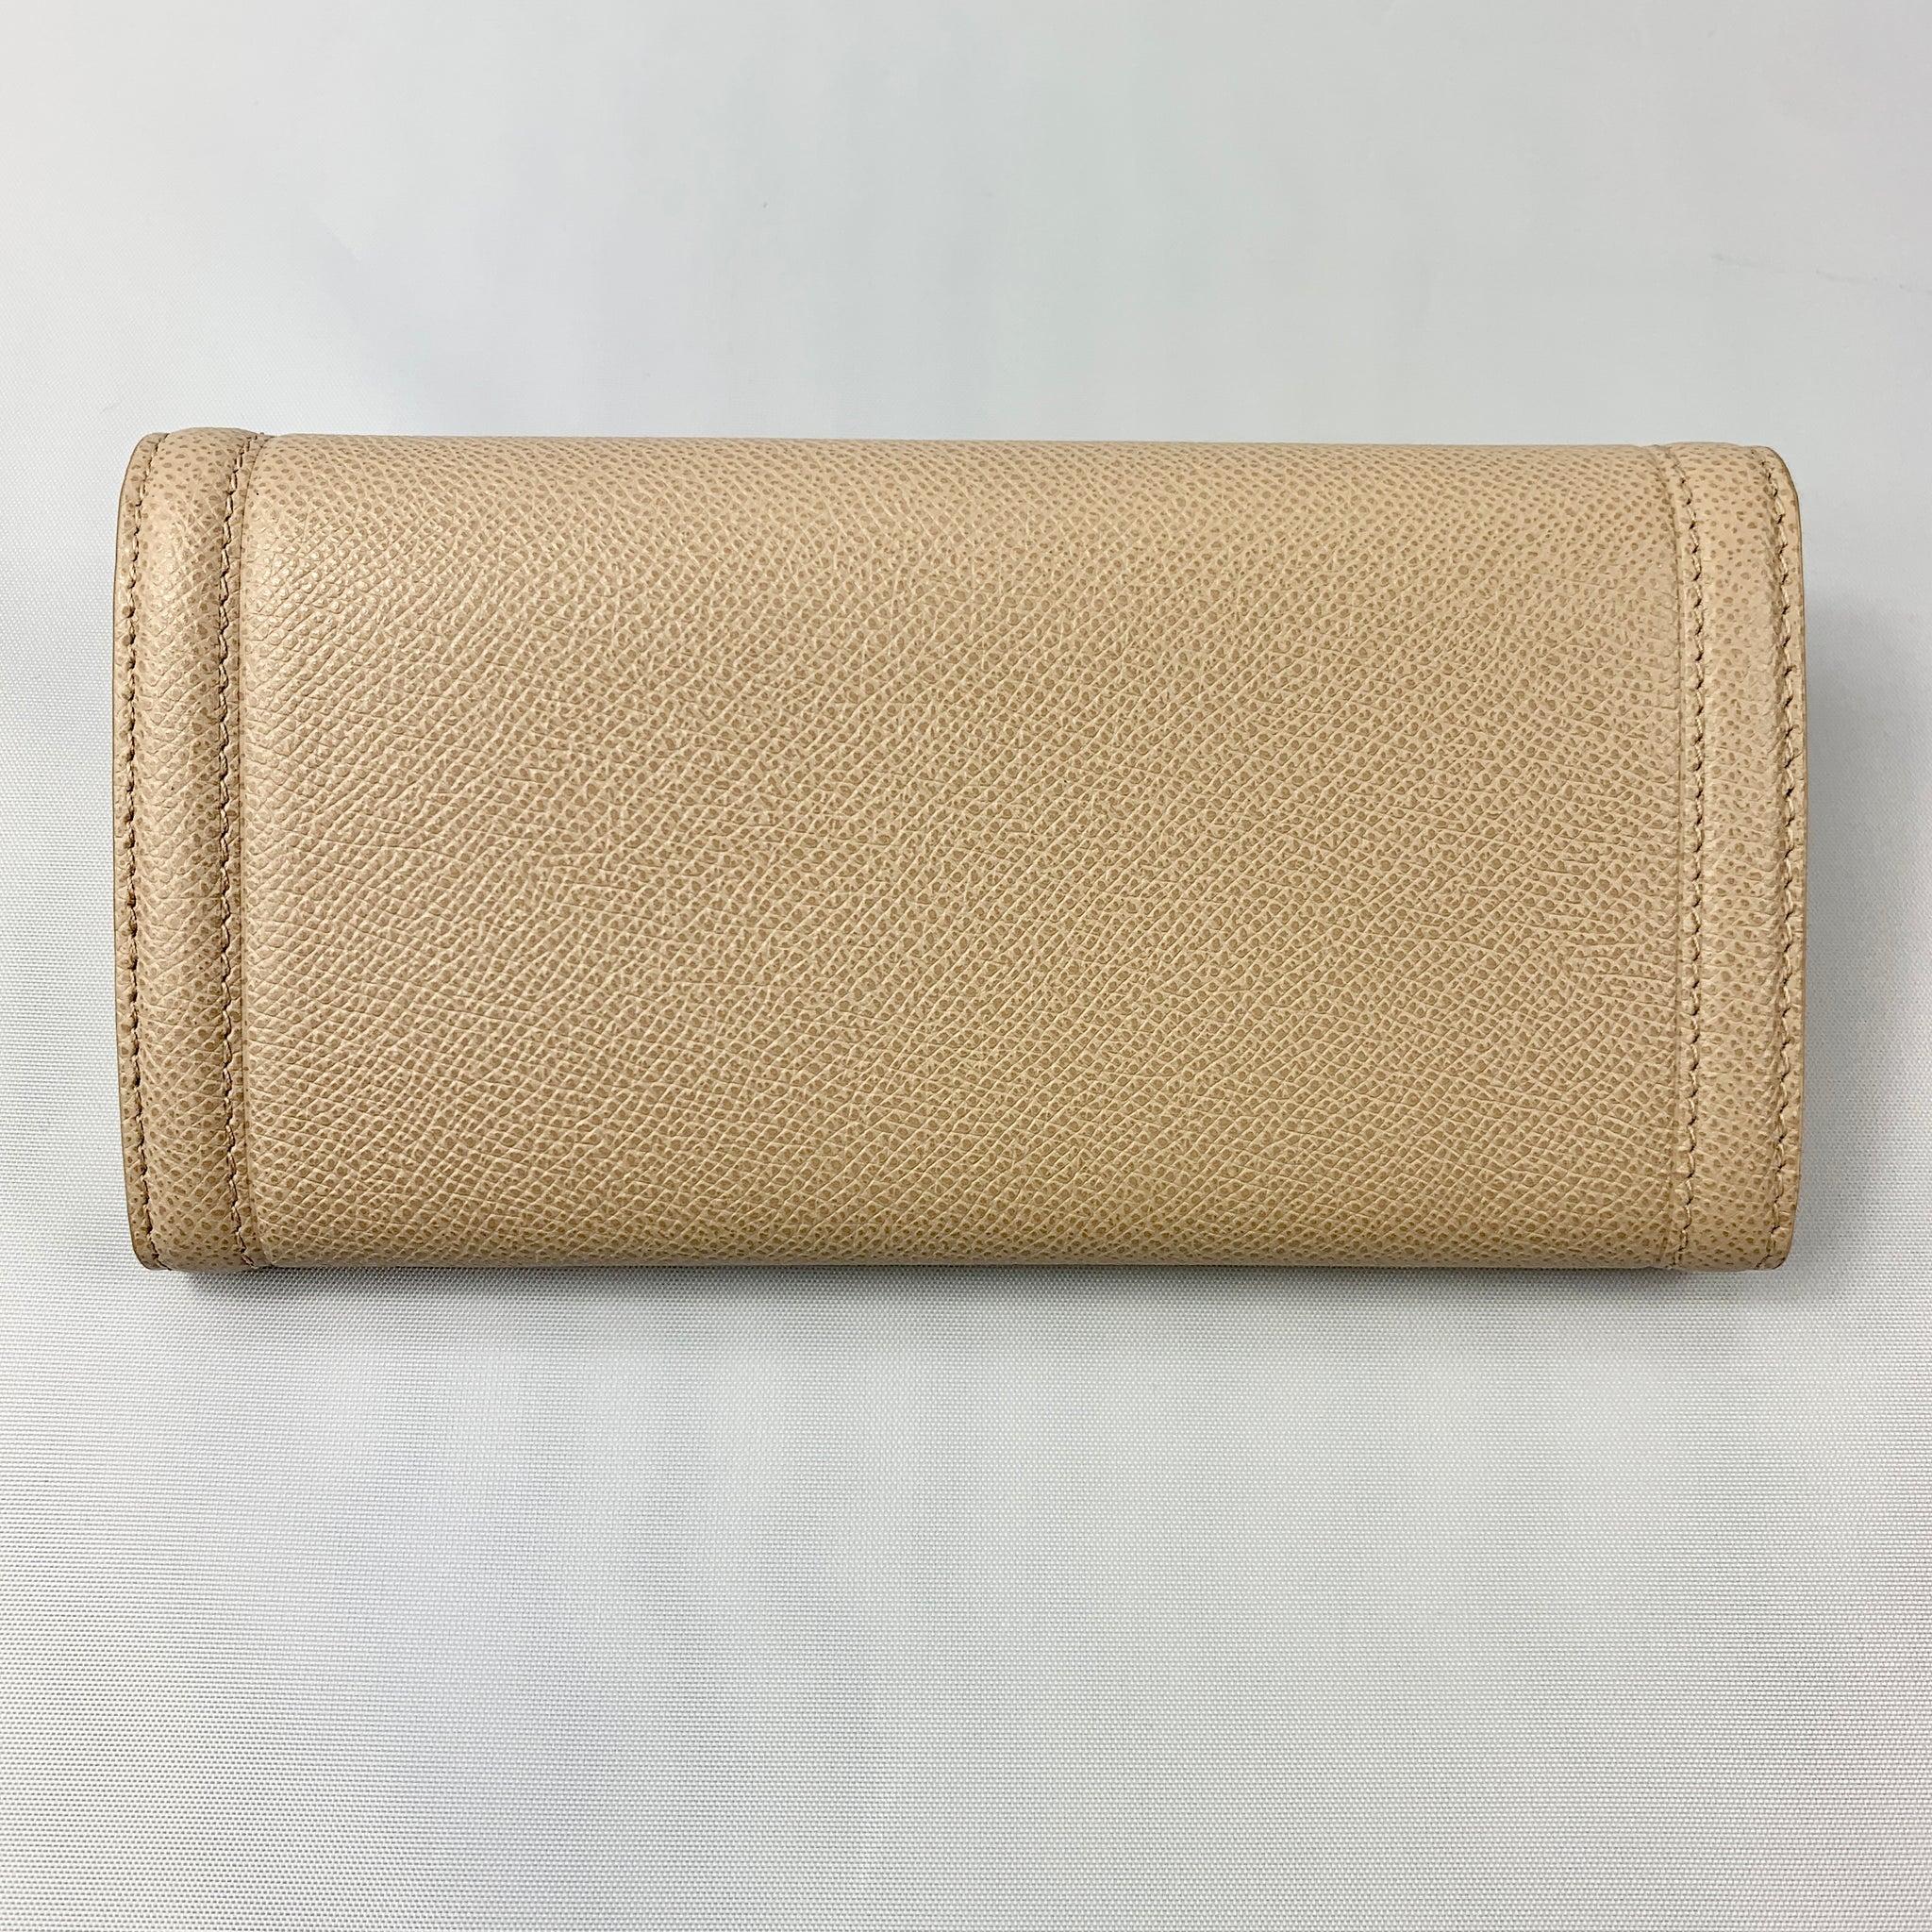 Vara Bow compact wallet - Leather Accessories - Women - Salvatore